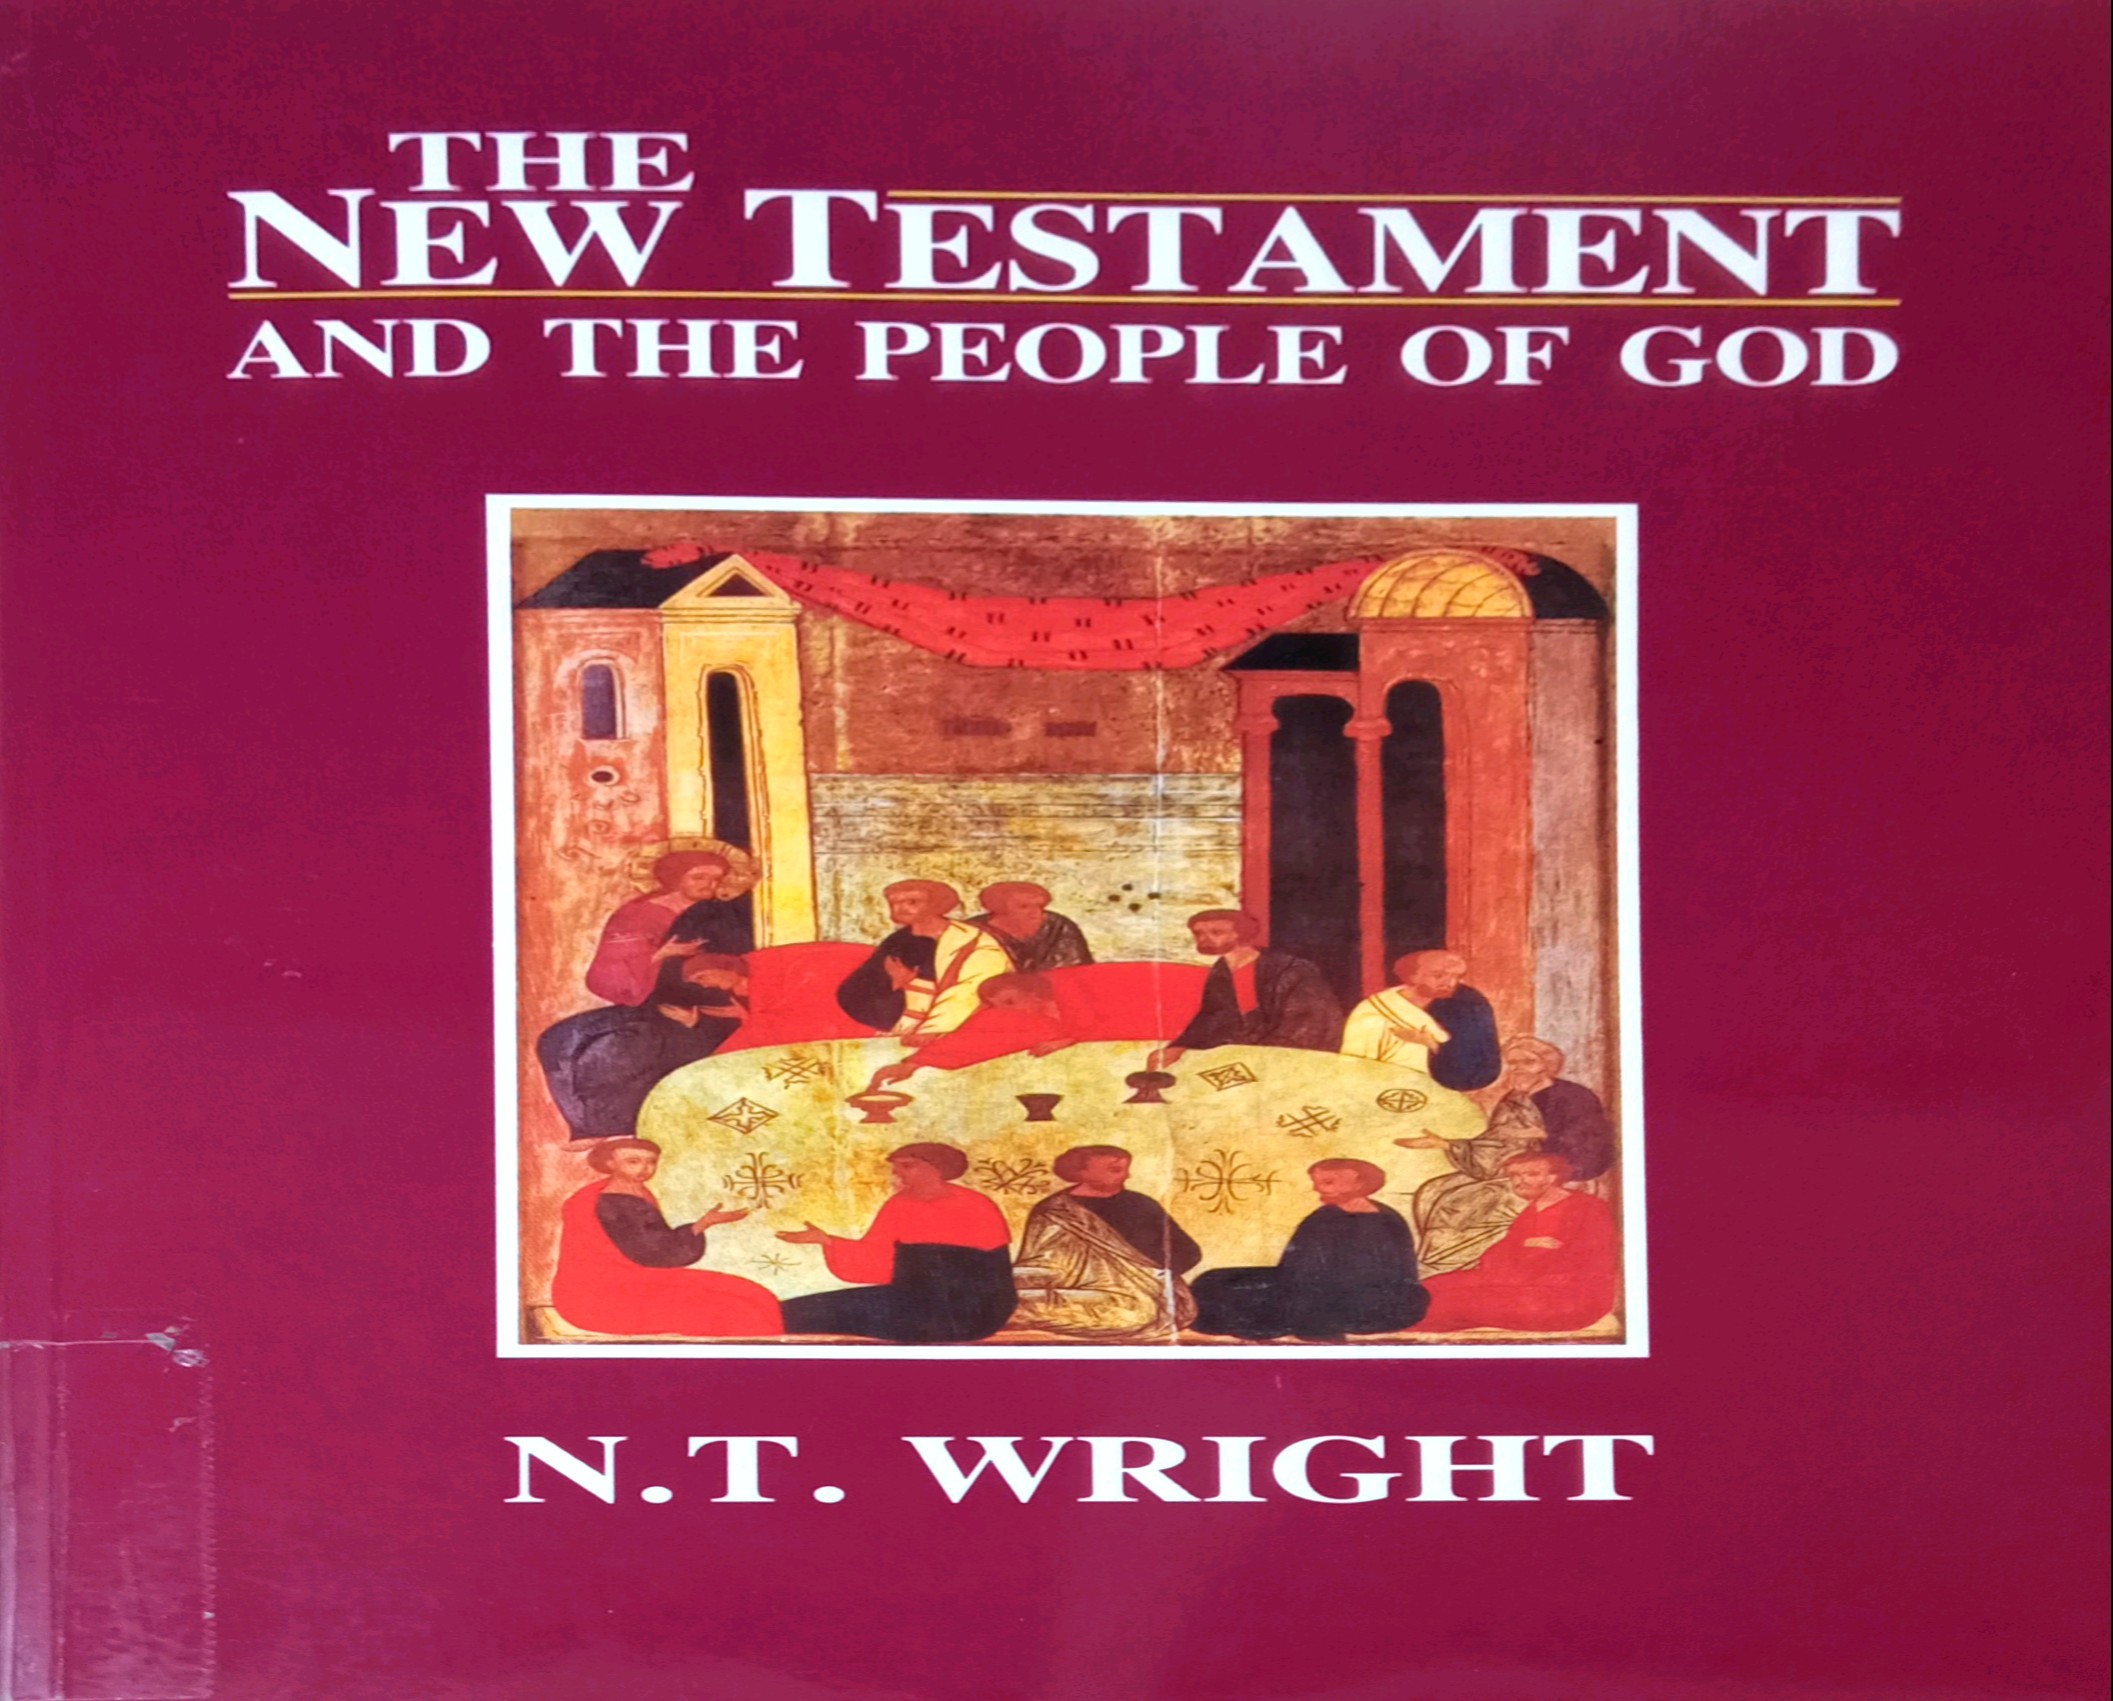 THE NEW TESTAMENT AND THE PEOPLE OF GOD